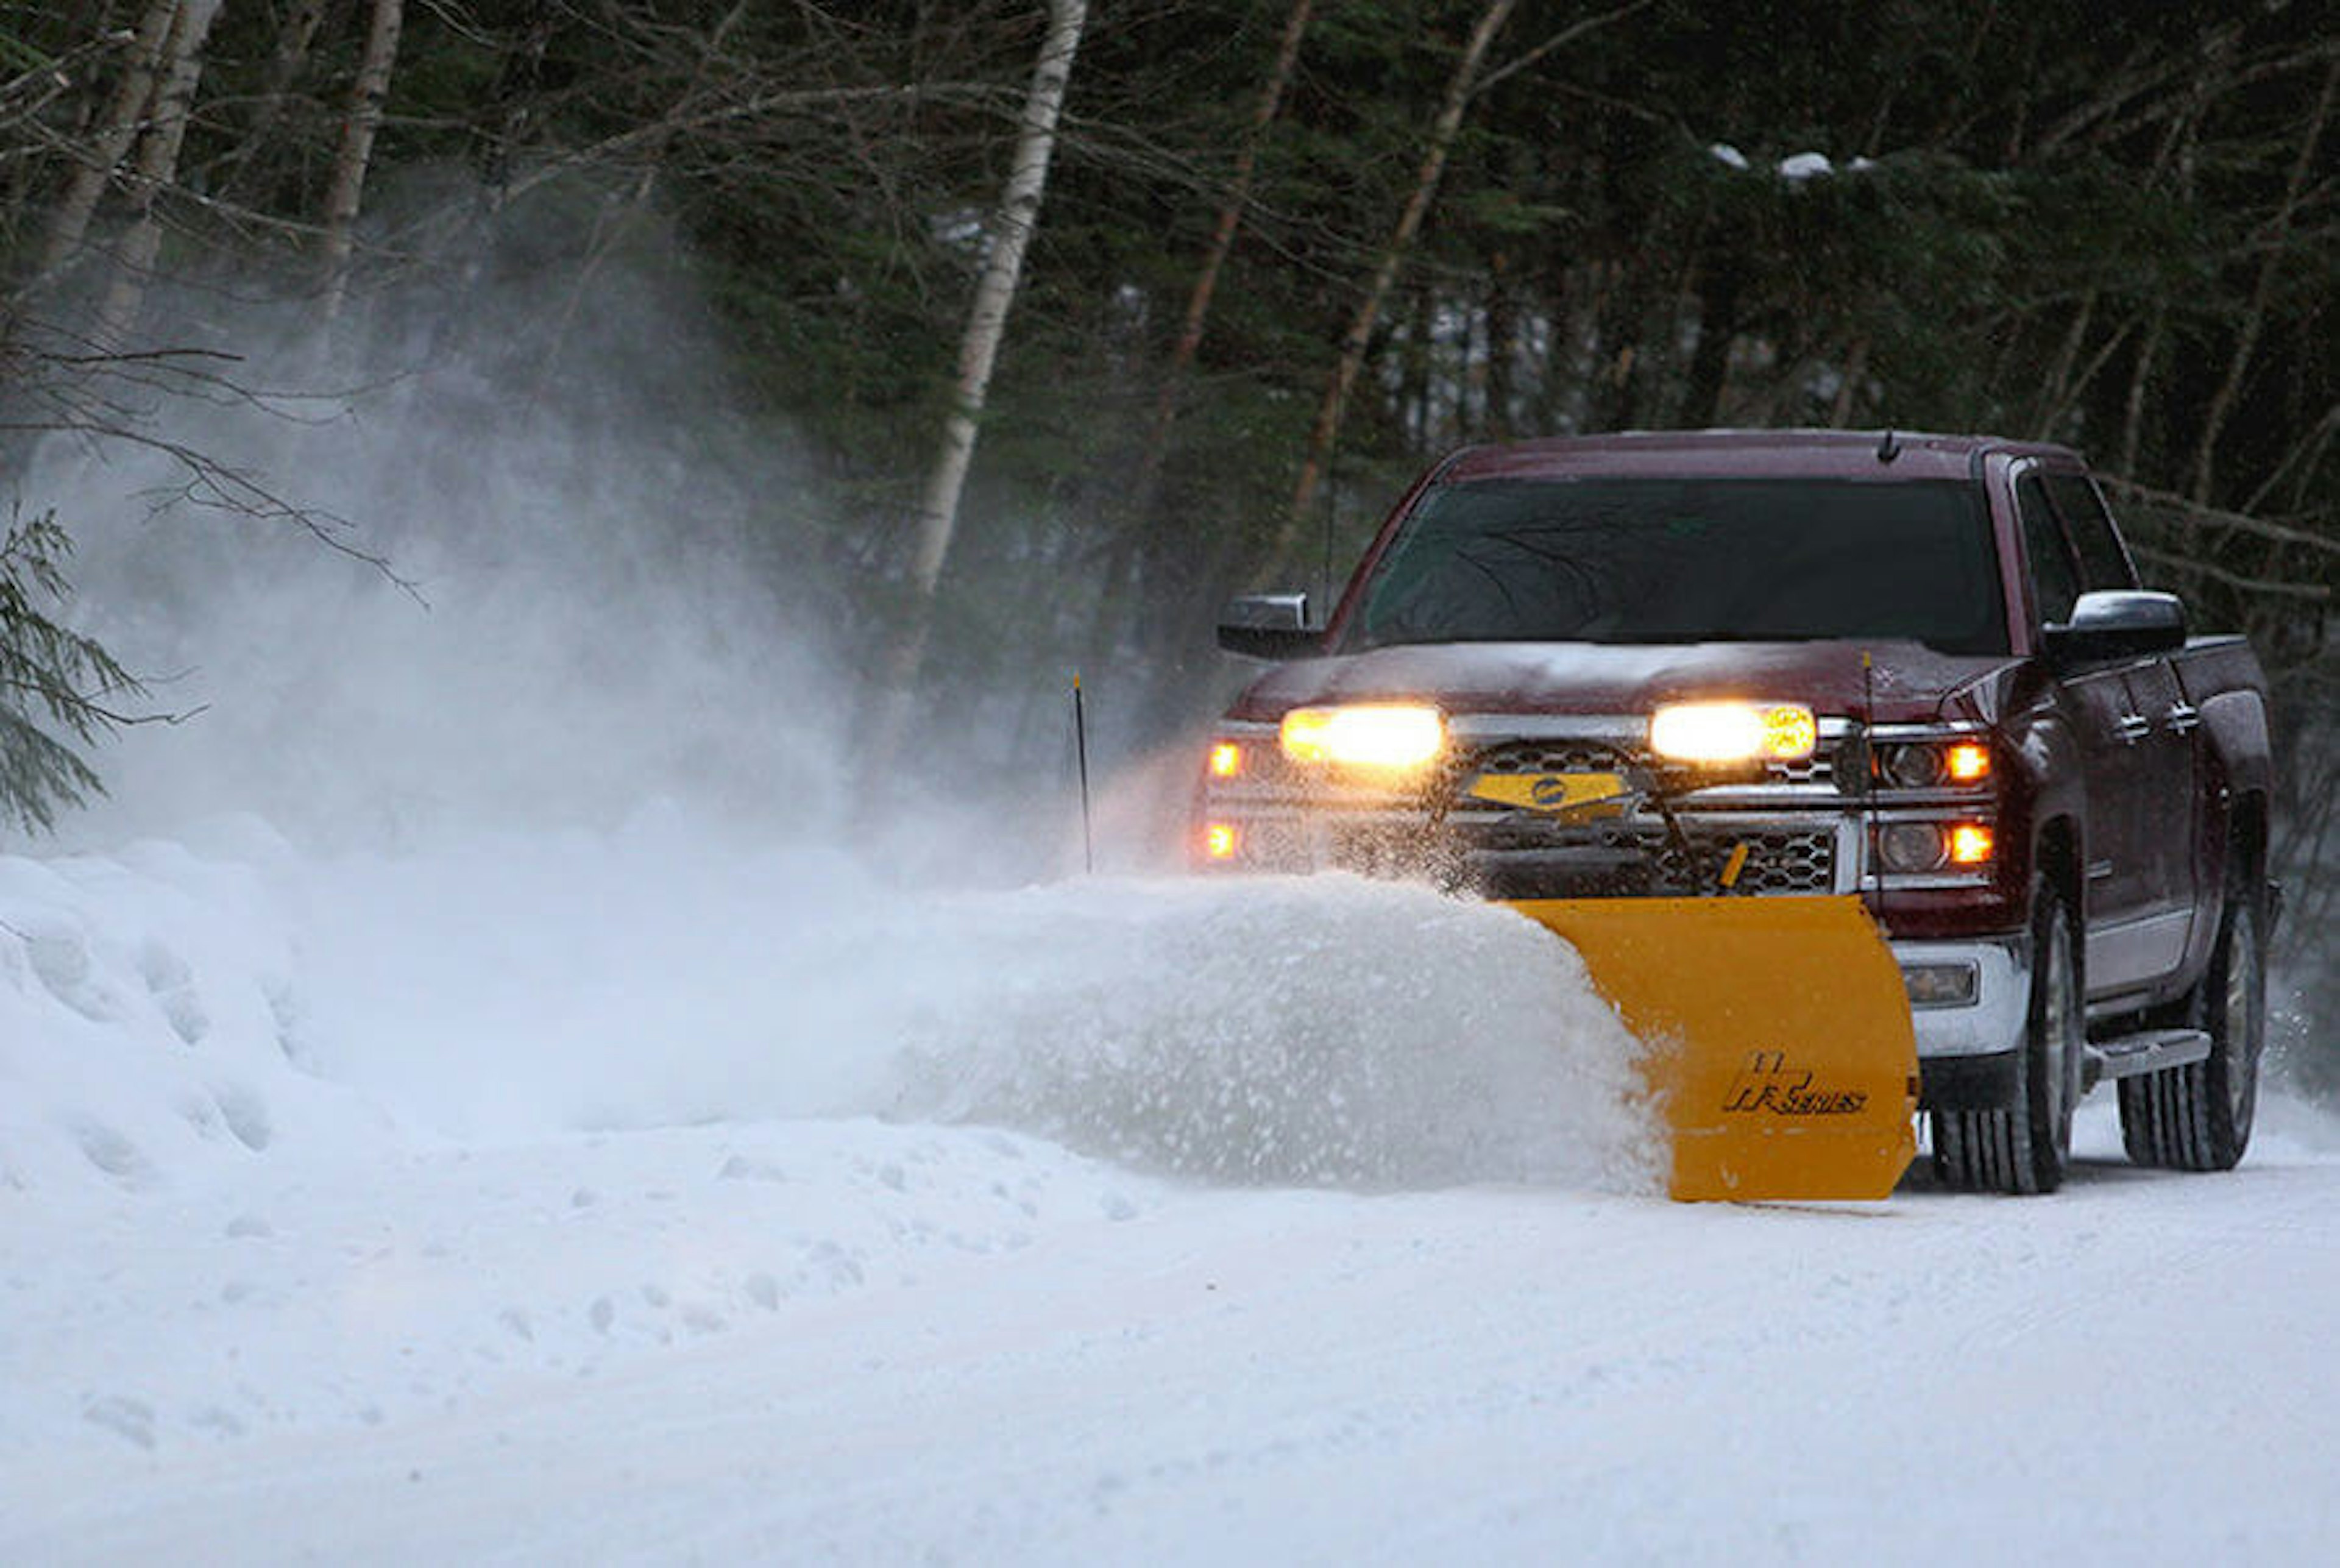 Light Truck Pushing Snow with Plow